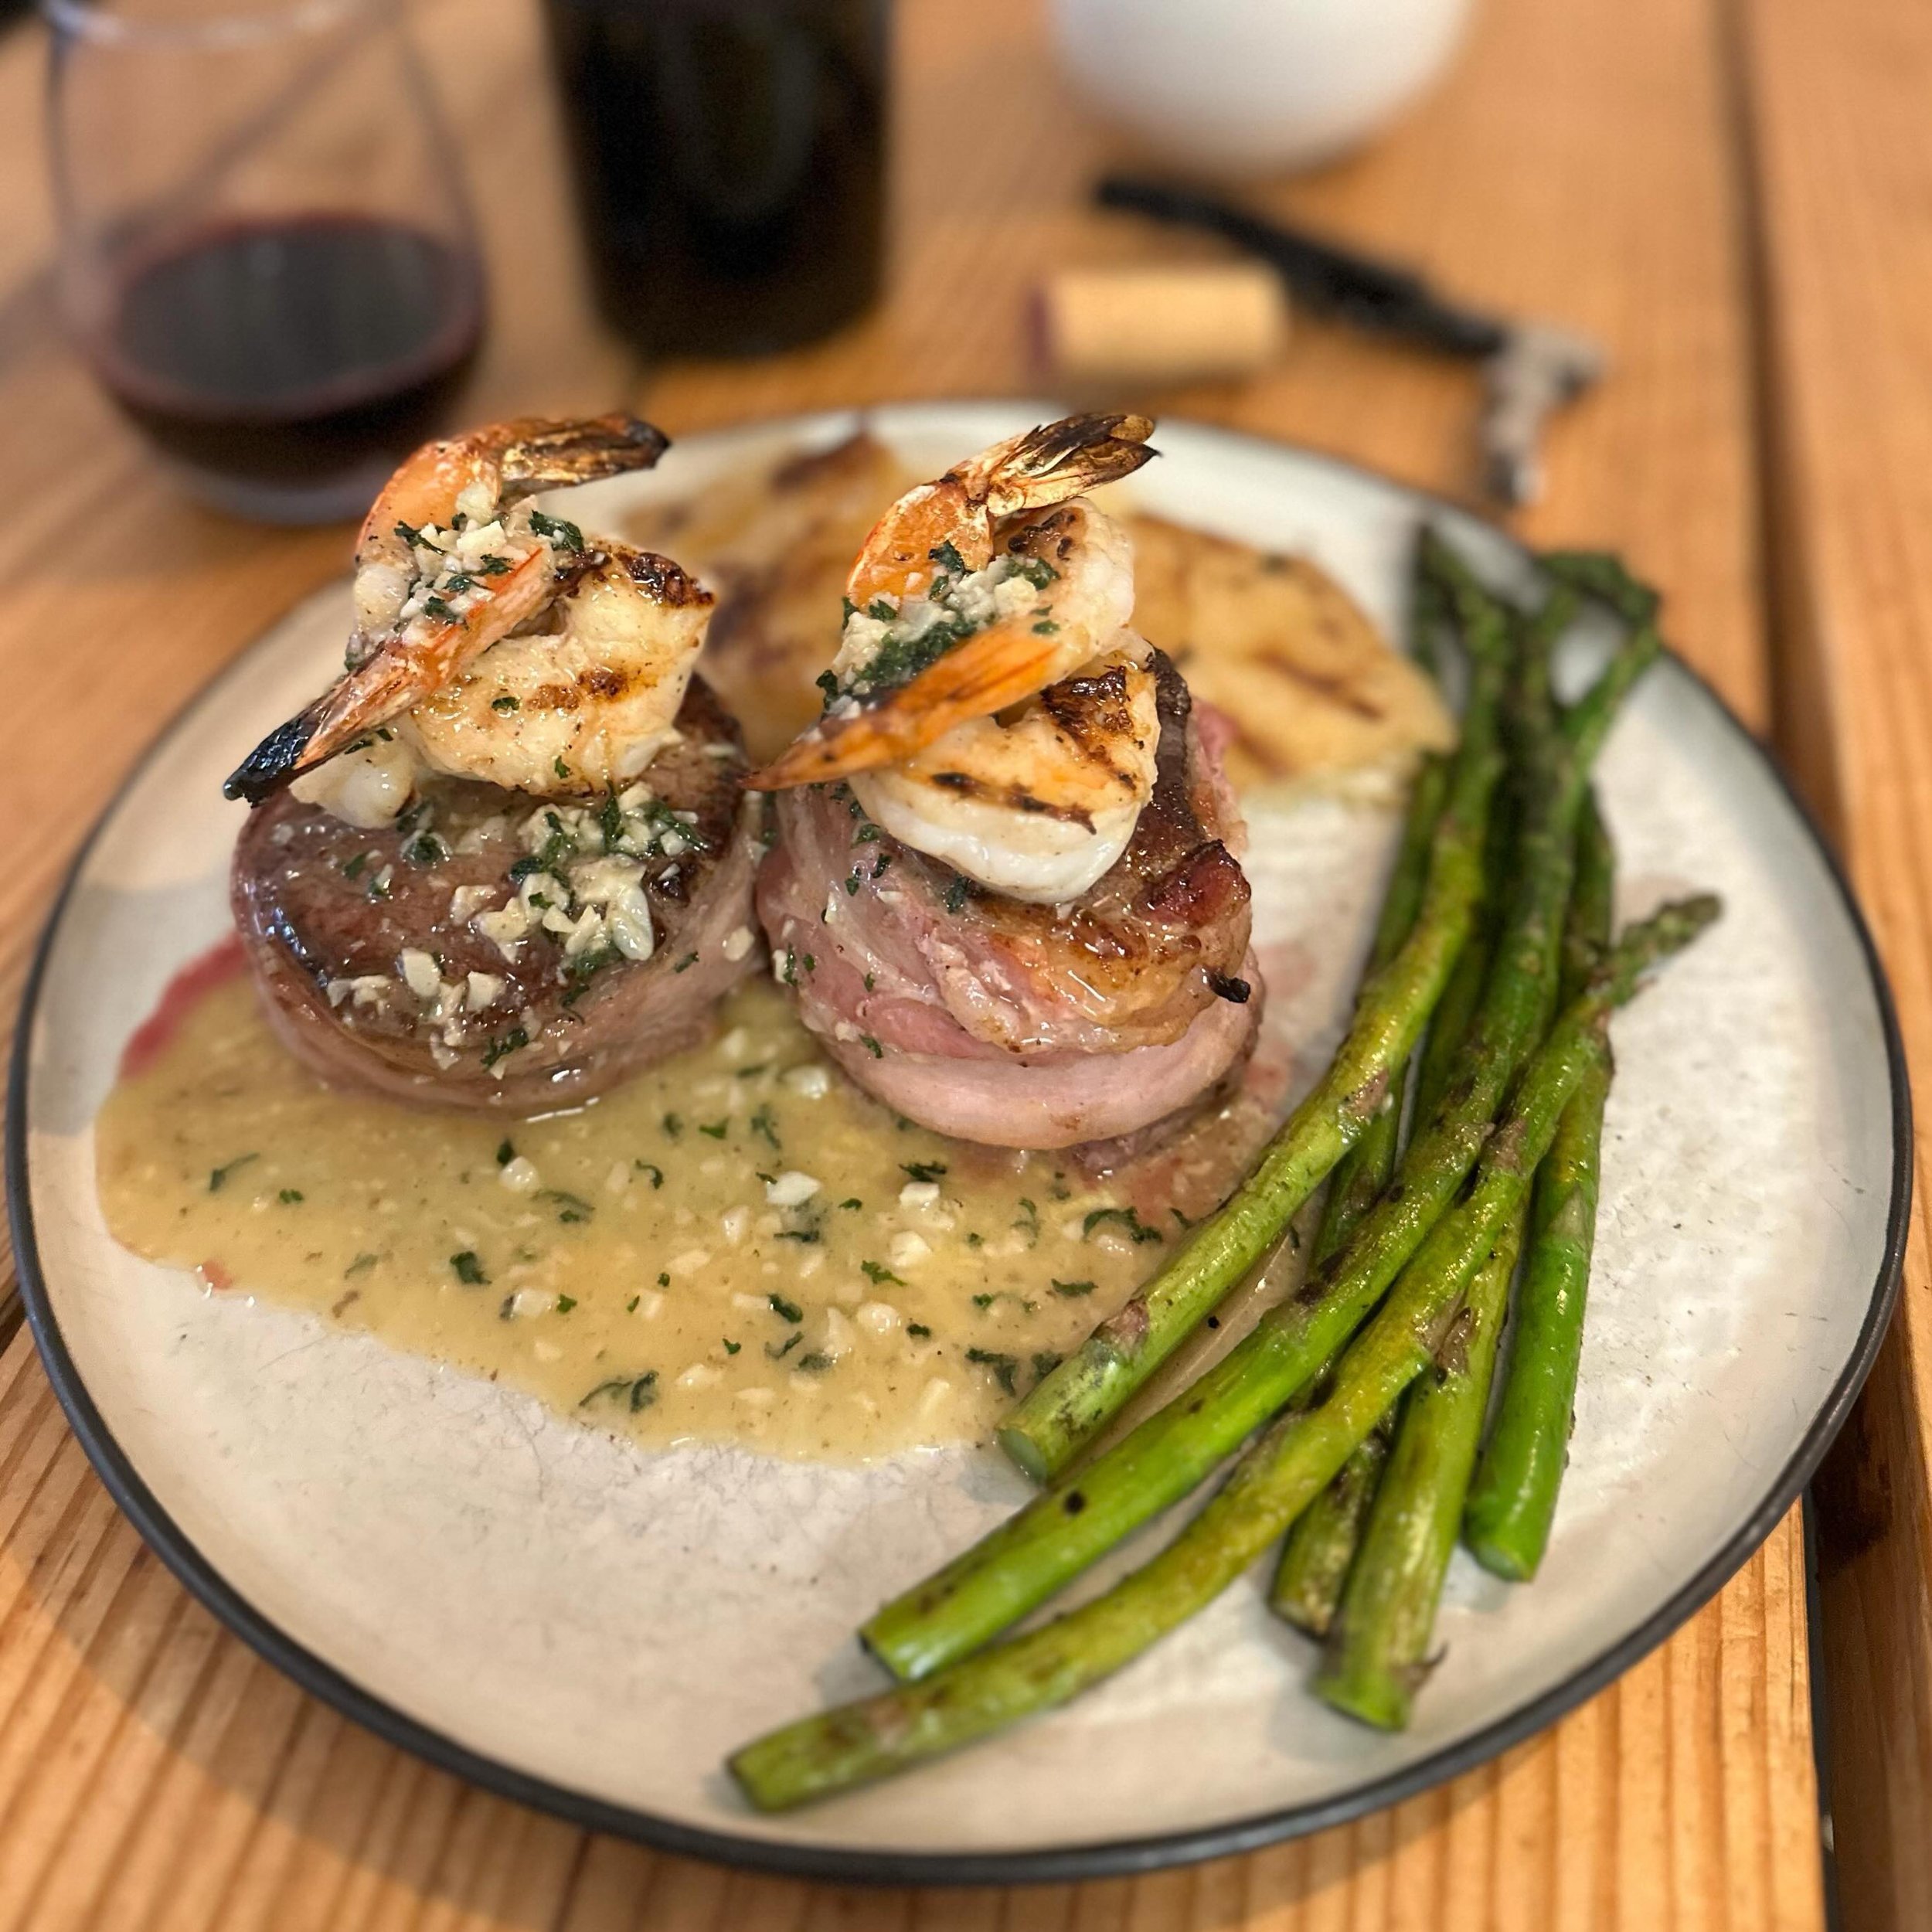 Steak Supper Club is back this weekend with 2 - 3 oz bacon wrapped filets topped with grilled shrimp, lemon garlic butter sauce and parsley. Served with au gratin potatoes and asparagus. 

We sold out last weekend so don&rsquo;t miss out - reservatio